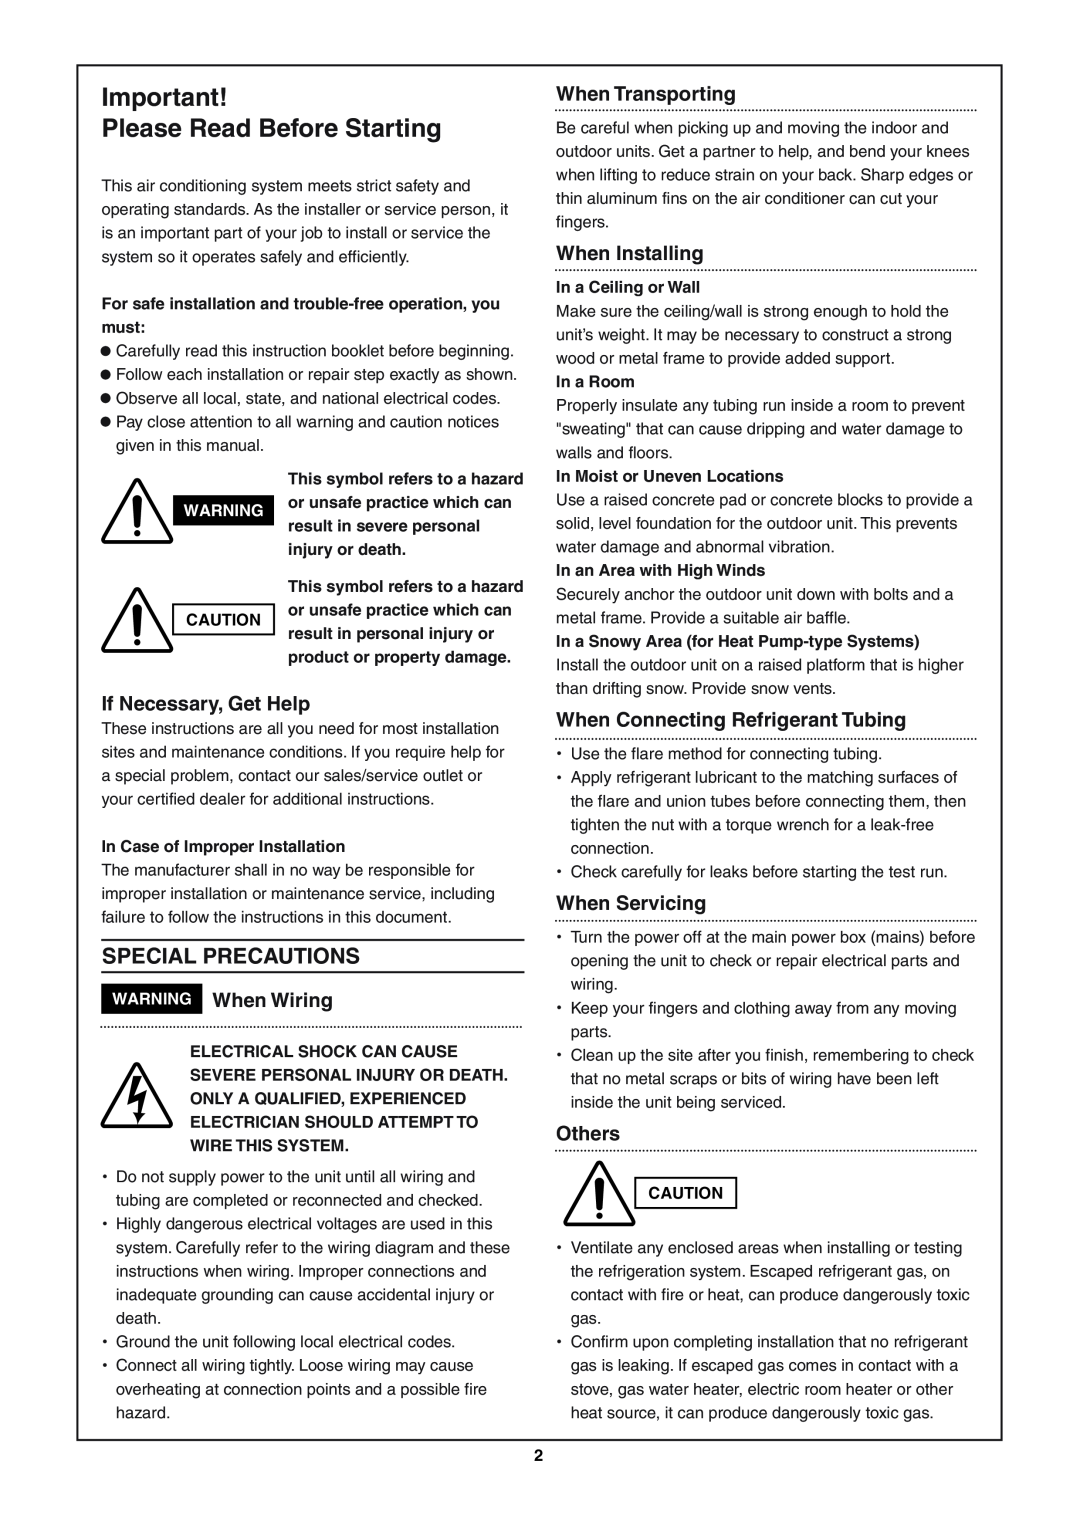 Sanyo SAP-KRV94EHDX Please Read Before Starting, Special Precautions, When Transporting, When Installing, When Servicing 